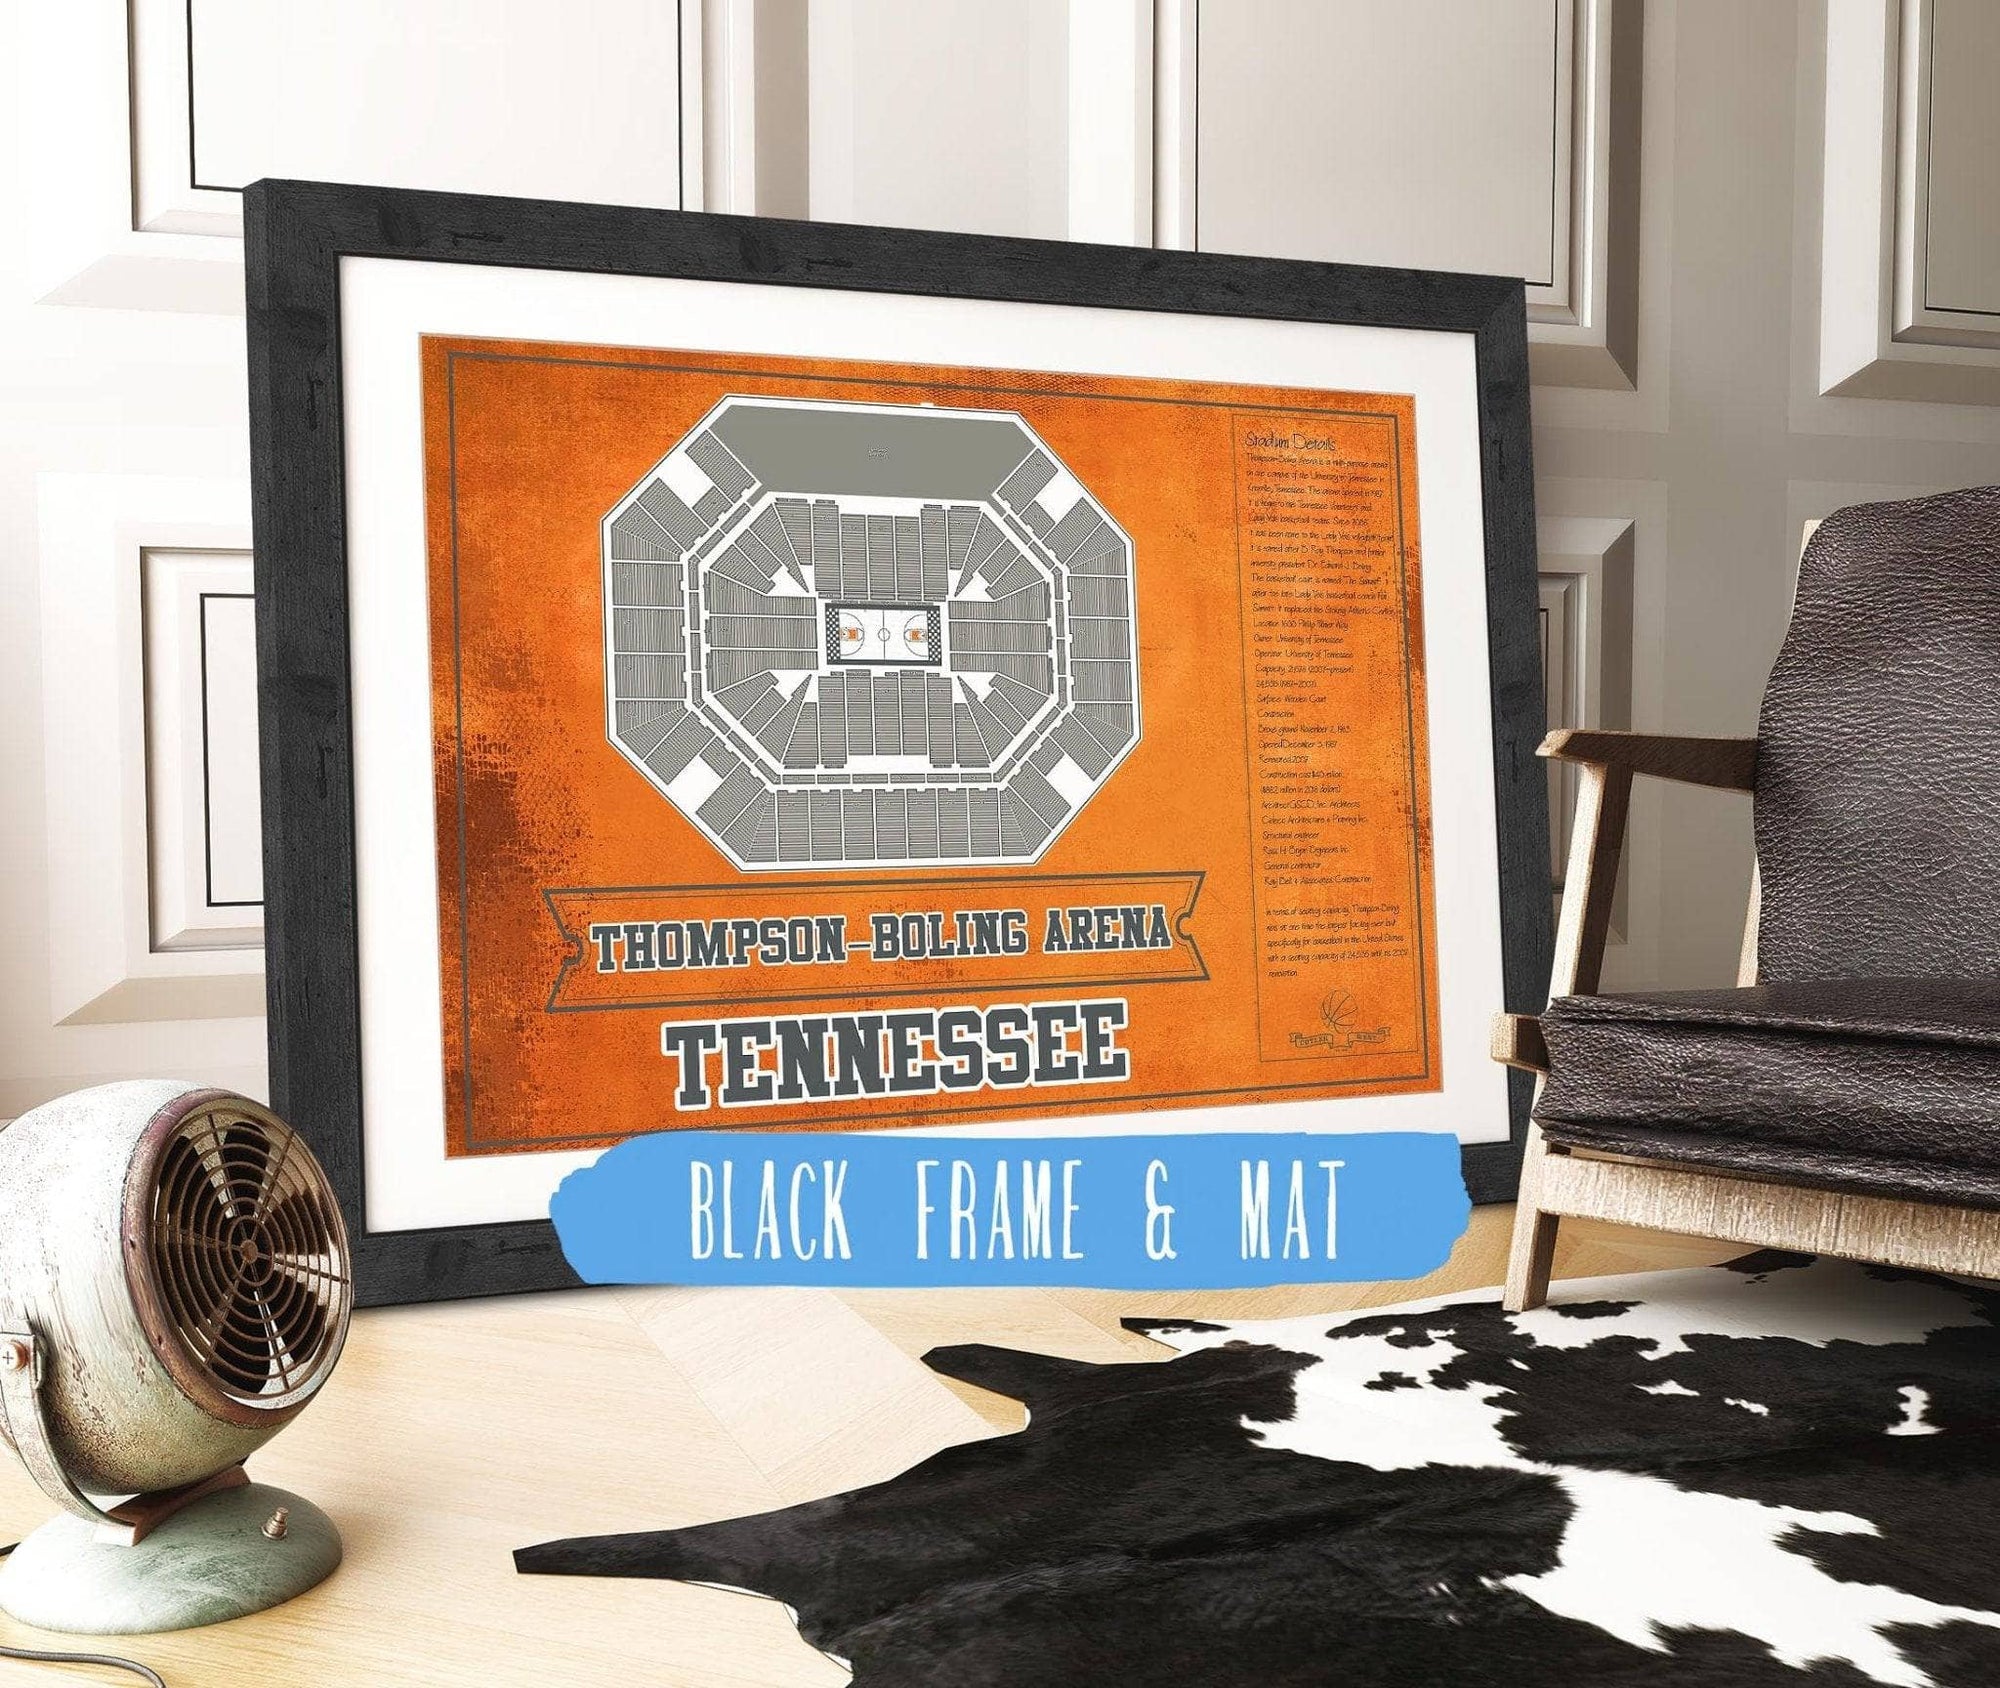 Cutler West Basketball Collection 14" x 11" / Black Frame & Mat Thompson–Boling Arena - Tennessee Volunteers, Lady Vols NCAA College Basketball Blueprint Art 93335021484748